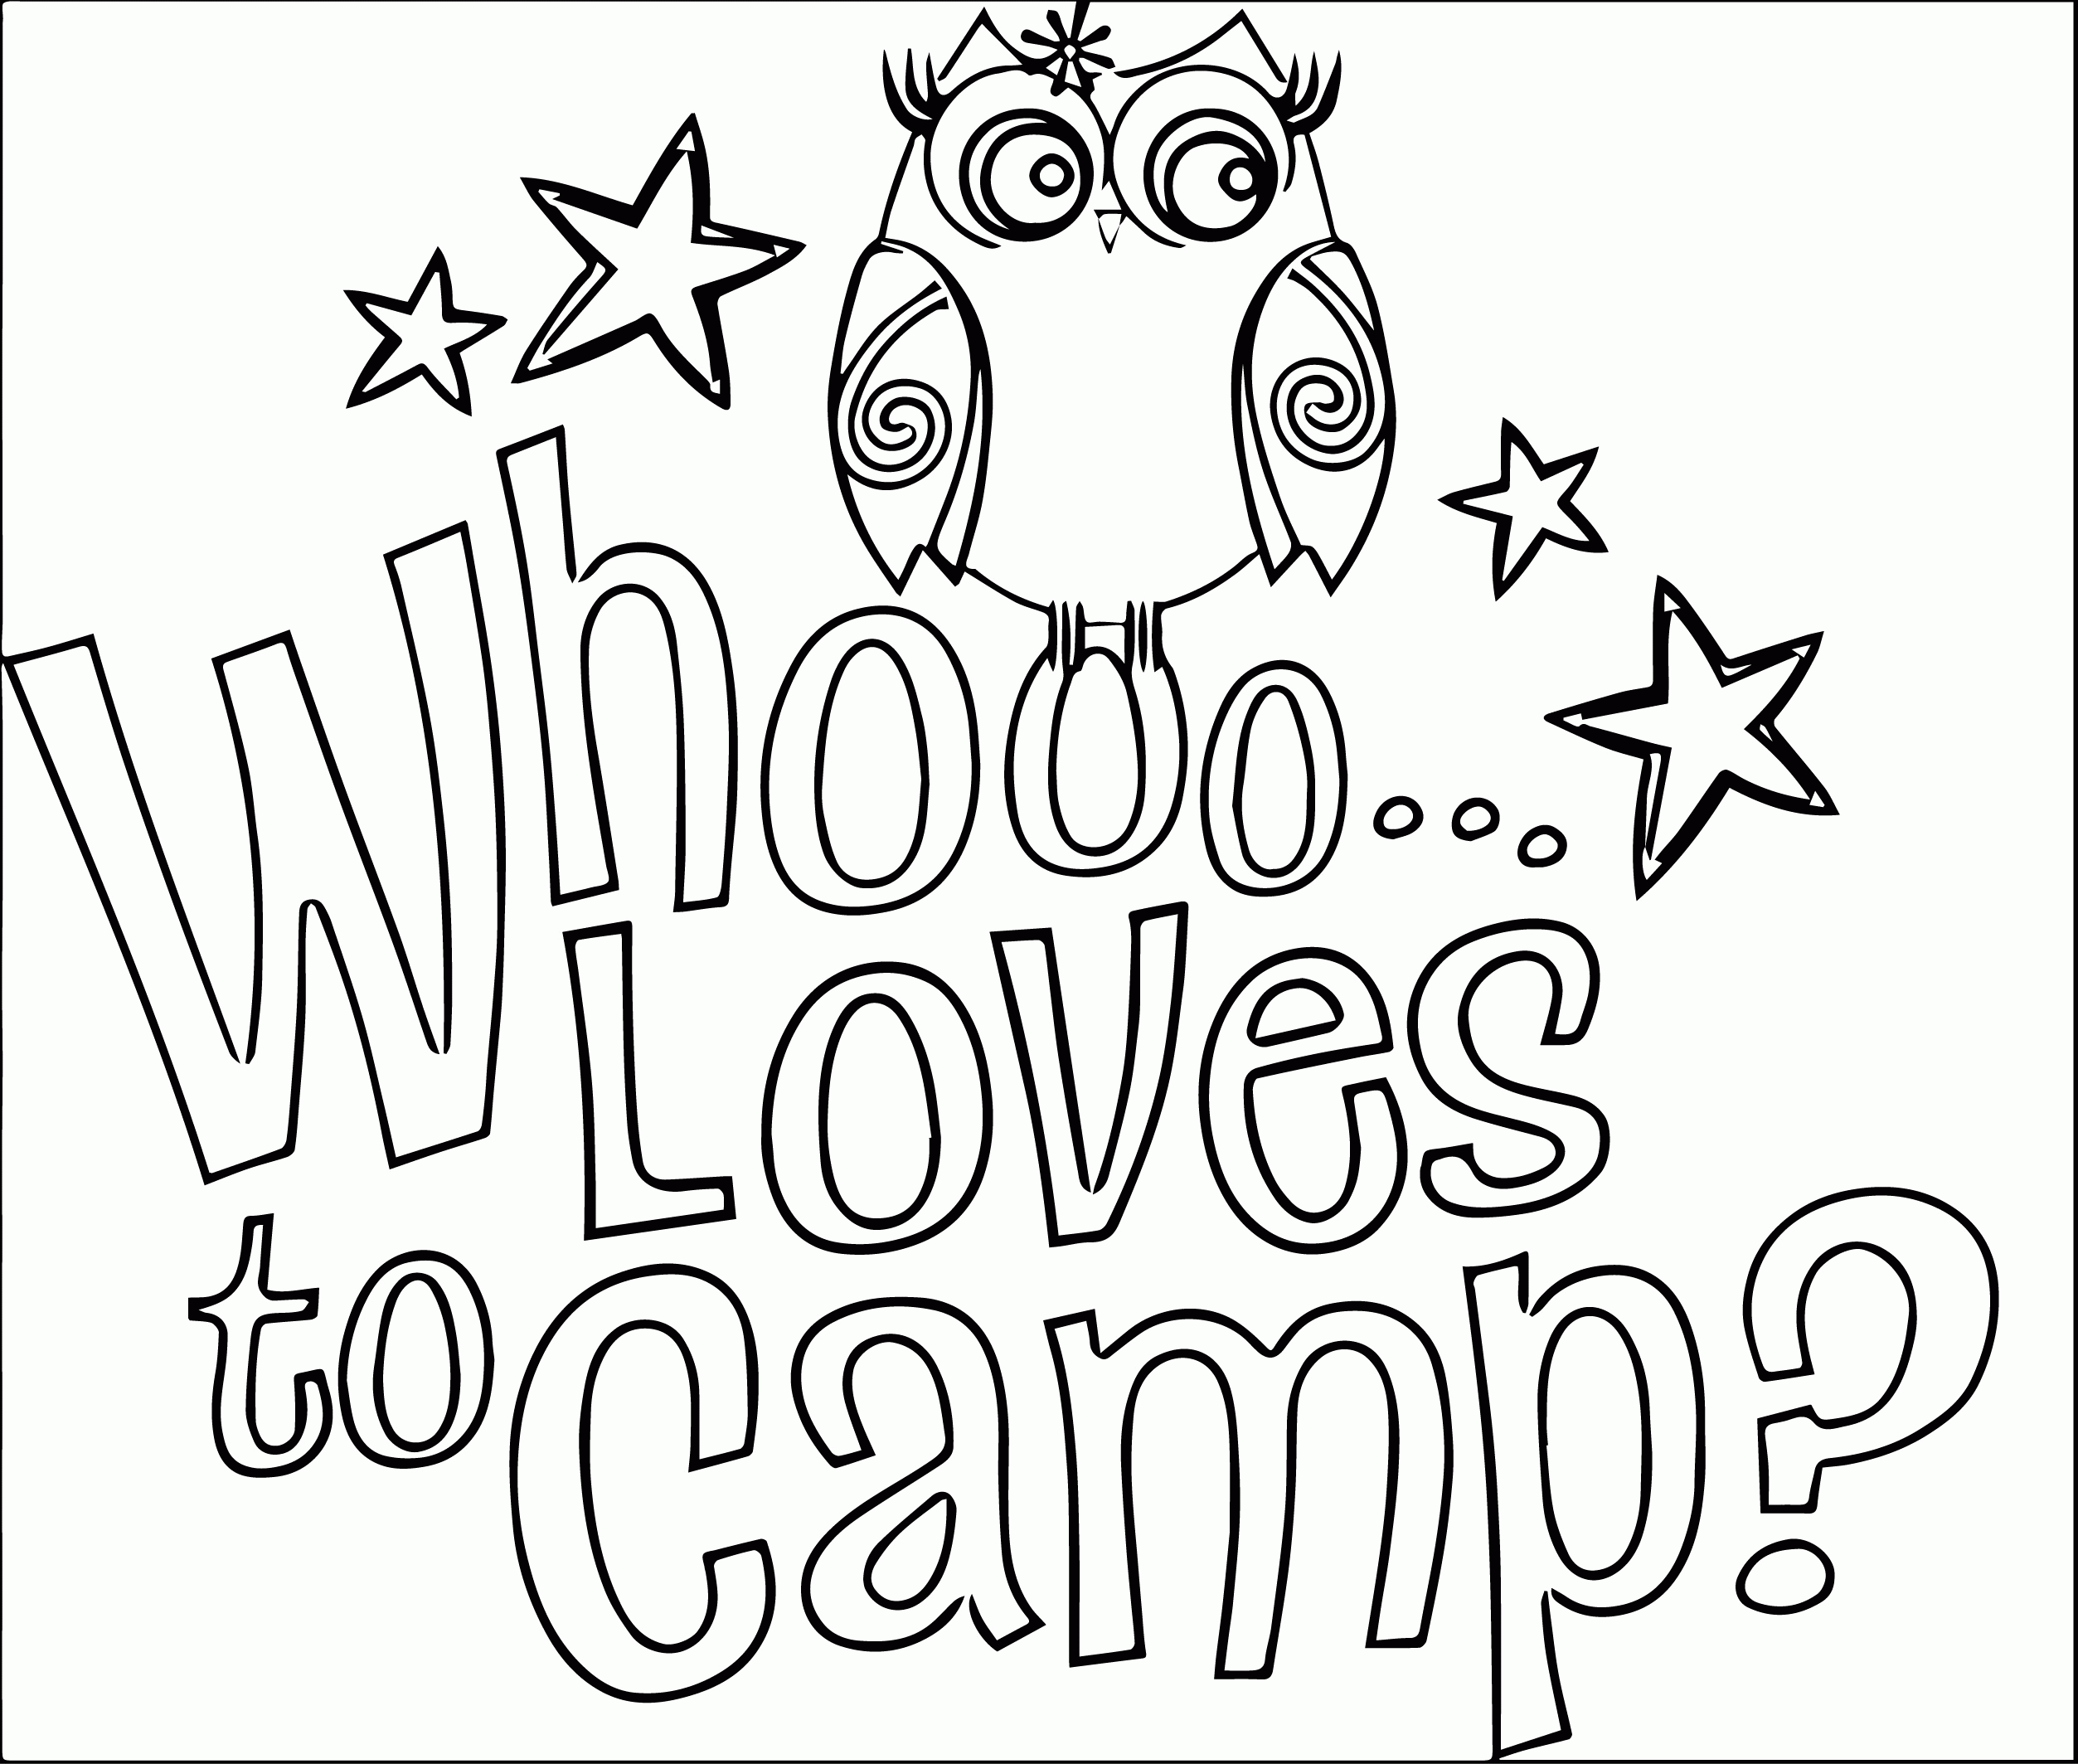 Girl Scout Brownie Clip Art Free Troop Camping Coloring Page